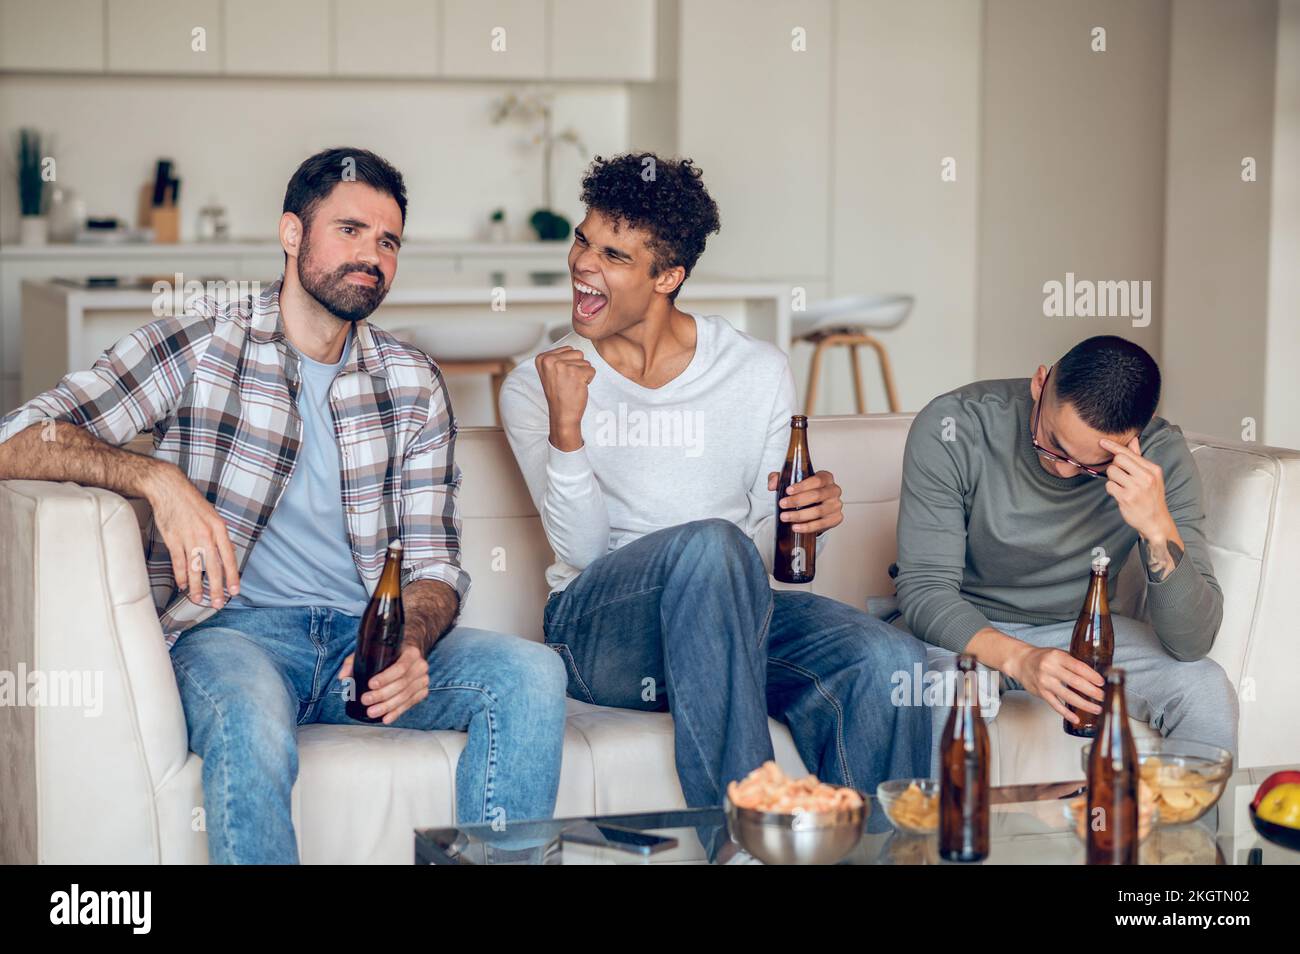 Gleeful young man gloating over his despondent buddies Stock Photo